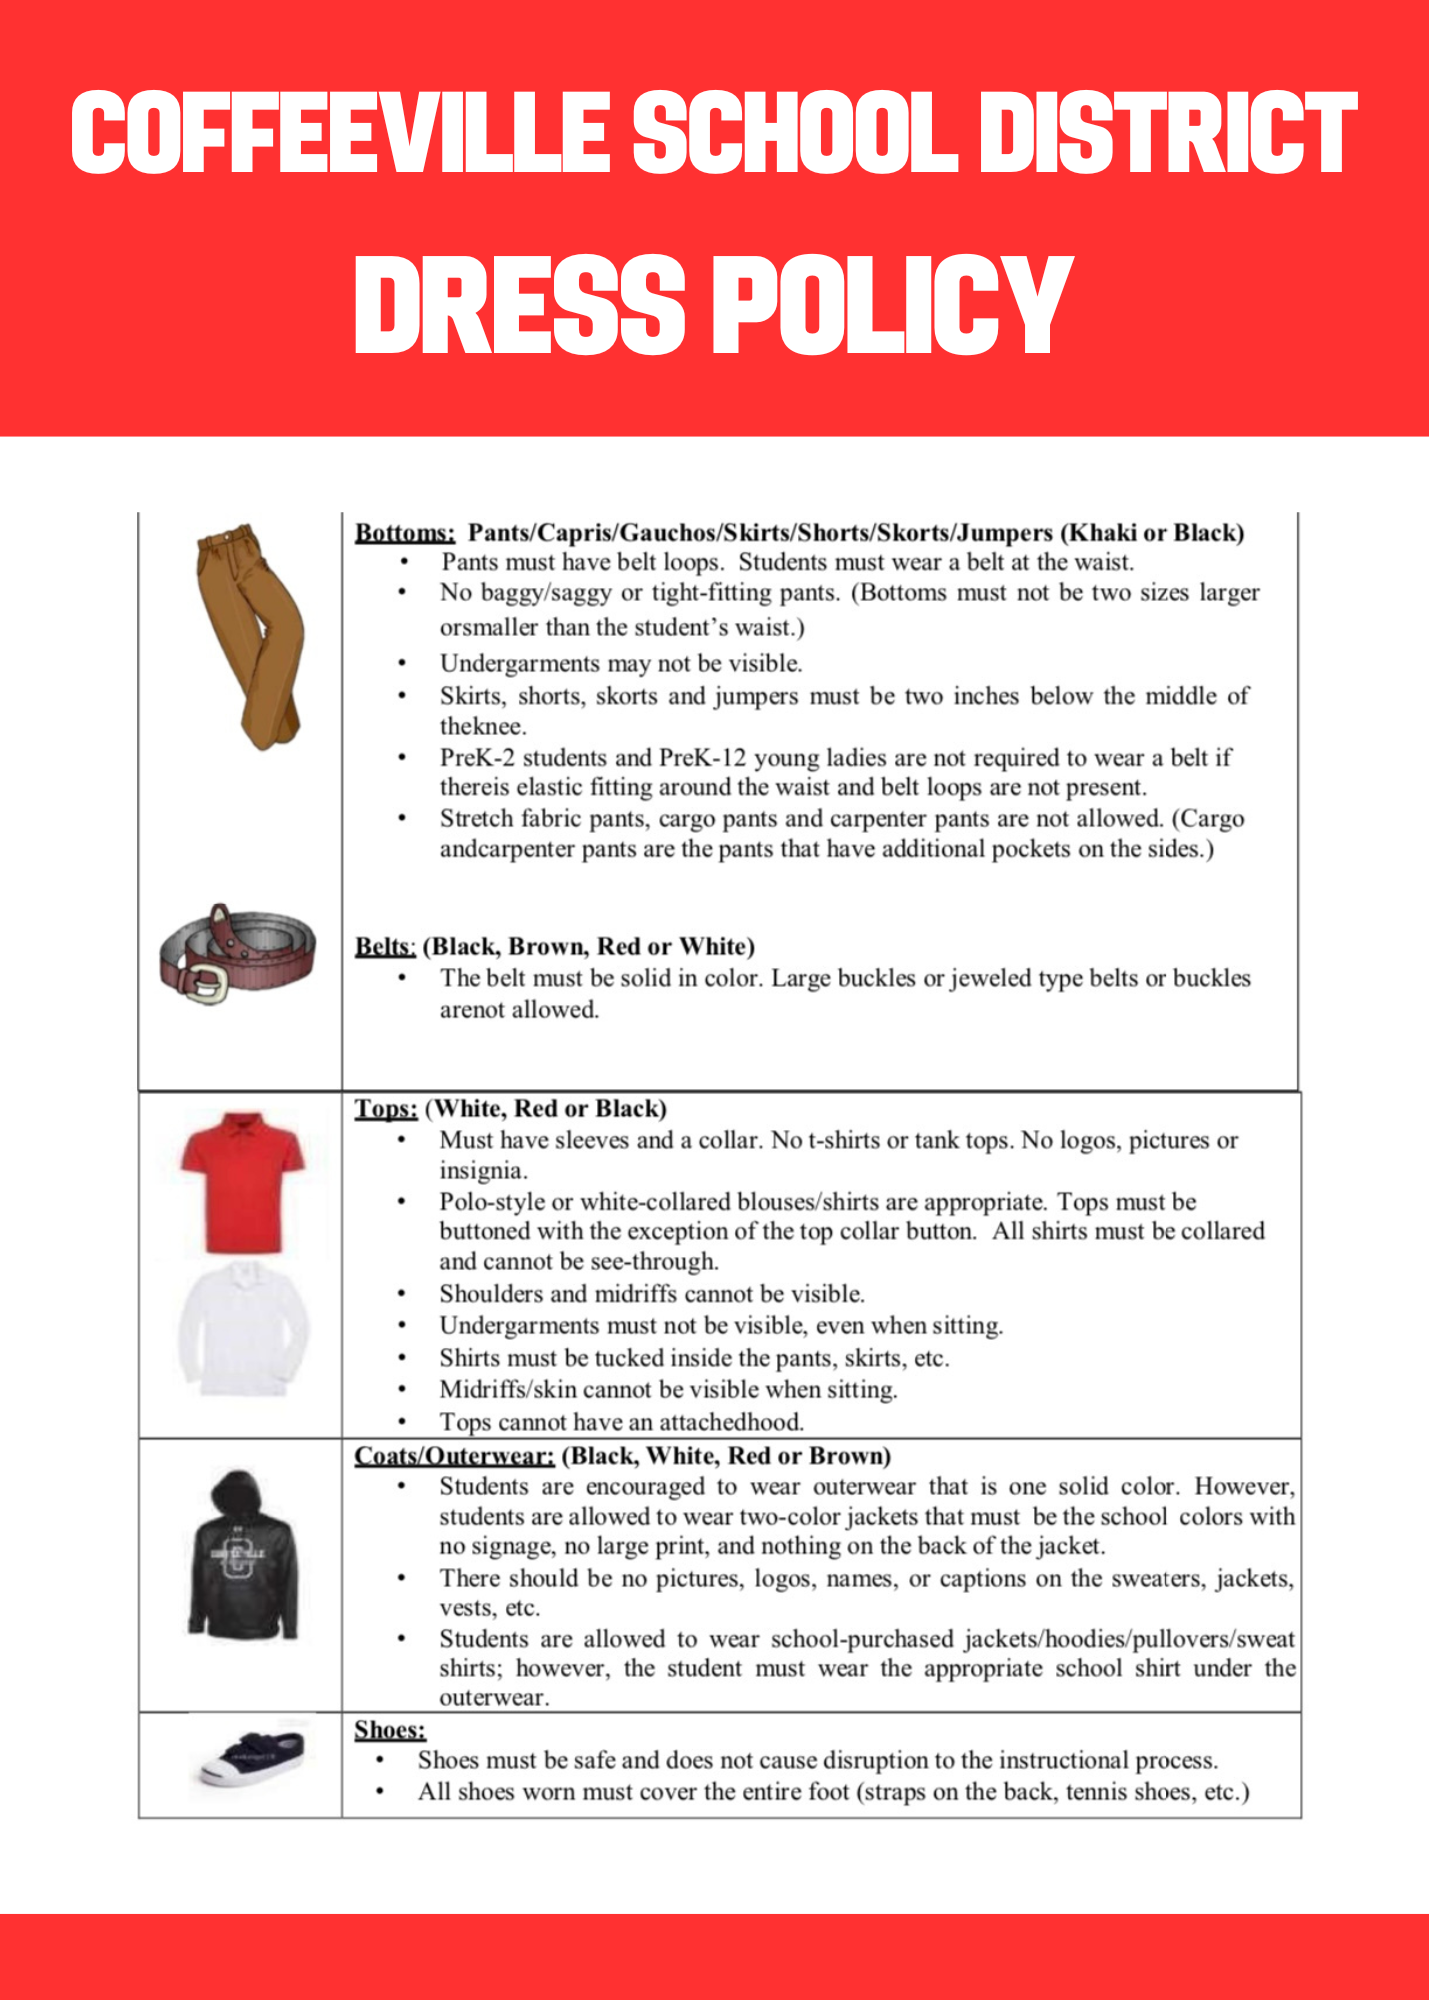 Coffeeville School District Dress Policy Regulations 2023-2024 (Board policy JCDB) Tops: (White, Red or Black) • Must have sleeves and a collar. No t-shirts or tank tops. No logos, pictures or insignia. • Polo-style or white-collared blouses/shirts are appropriate. Tops must be buttoned with the exception of the top collar button. All shirts must be collared and cannot be see-through. • Shoulders and midriffs cannot be visible. • Undergarments must not be visible, even when sitting. • Shirts must be tucked inside the pants, skirts, etc. • Midriffs/skin cannot be visible when sitting. • Tops cannot have an attachedhood. Coats/Outerwear: (Black, White, Red or Brown) • Students are encouraged to wear outerwear that is one solid color. However, students are allowed to wear two-color jackets that must be the school colors with no signage, no large print, and nothing on the back of the jacket. • There should be no pictures, logos, names, or captions on the sweaters, jackets, vests, etc. • Students are allowed to wear school-purchased jackets/hoodies/pullovers/sweat shirts; however, the student must wear the appropriate school shirt under the outerwear. Shoes: • Shoes must be safe and does not cause disruption to the instructional process. • All shoes worn must cover the entire foot (straps on the back, tennis shoes, etc.) Headwear: (Black, Red, White, or Brown) • Hats/caps/hoods are not permitted. Toboggans may be worn but must be removed upon entrance of the school building. Toboggans cannot have a bib or insignia and must be solid in color. Belts: (Black, Brown, Red or White) • The belt must be solid in color. Large buckles or jeweled type belts or buckles arenot allowed. Bottoms: Pants/Capris/Gauchos/Skirts/Shorts/Skorts/Jumpers (Khaki or Black) • Pants must have belt loops. Students must wear a belt at the waist. • No baggy/saggy or tight-fitting pants. (Bottoms must not be two sizes larger or smaller than the student’s waist.) • Undergarments may not be visible. • Skirts, shorts, skorts and jumpers must be two inches below the middle of theknee. • PreK-2 students and PreK-12 young ladies are not required to wear a belt if thereis elastic fitting around the waist and belt loops are not present. • Stretch fabric pants, cargo pants and carpenter pants are not allowed. (Cargo andcarpenter pants are the pants that have additional pockets on the sides.)